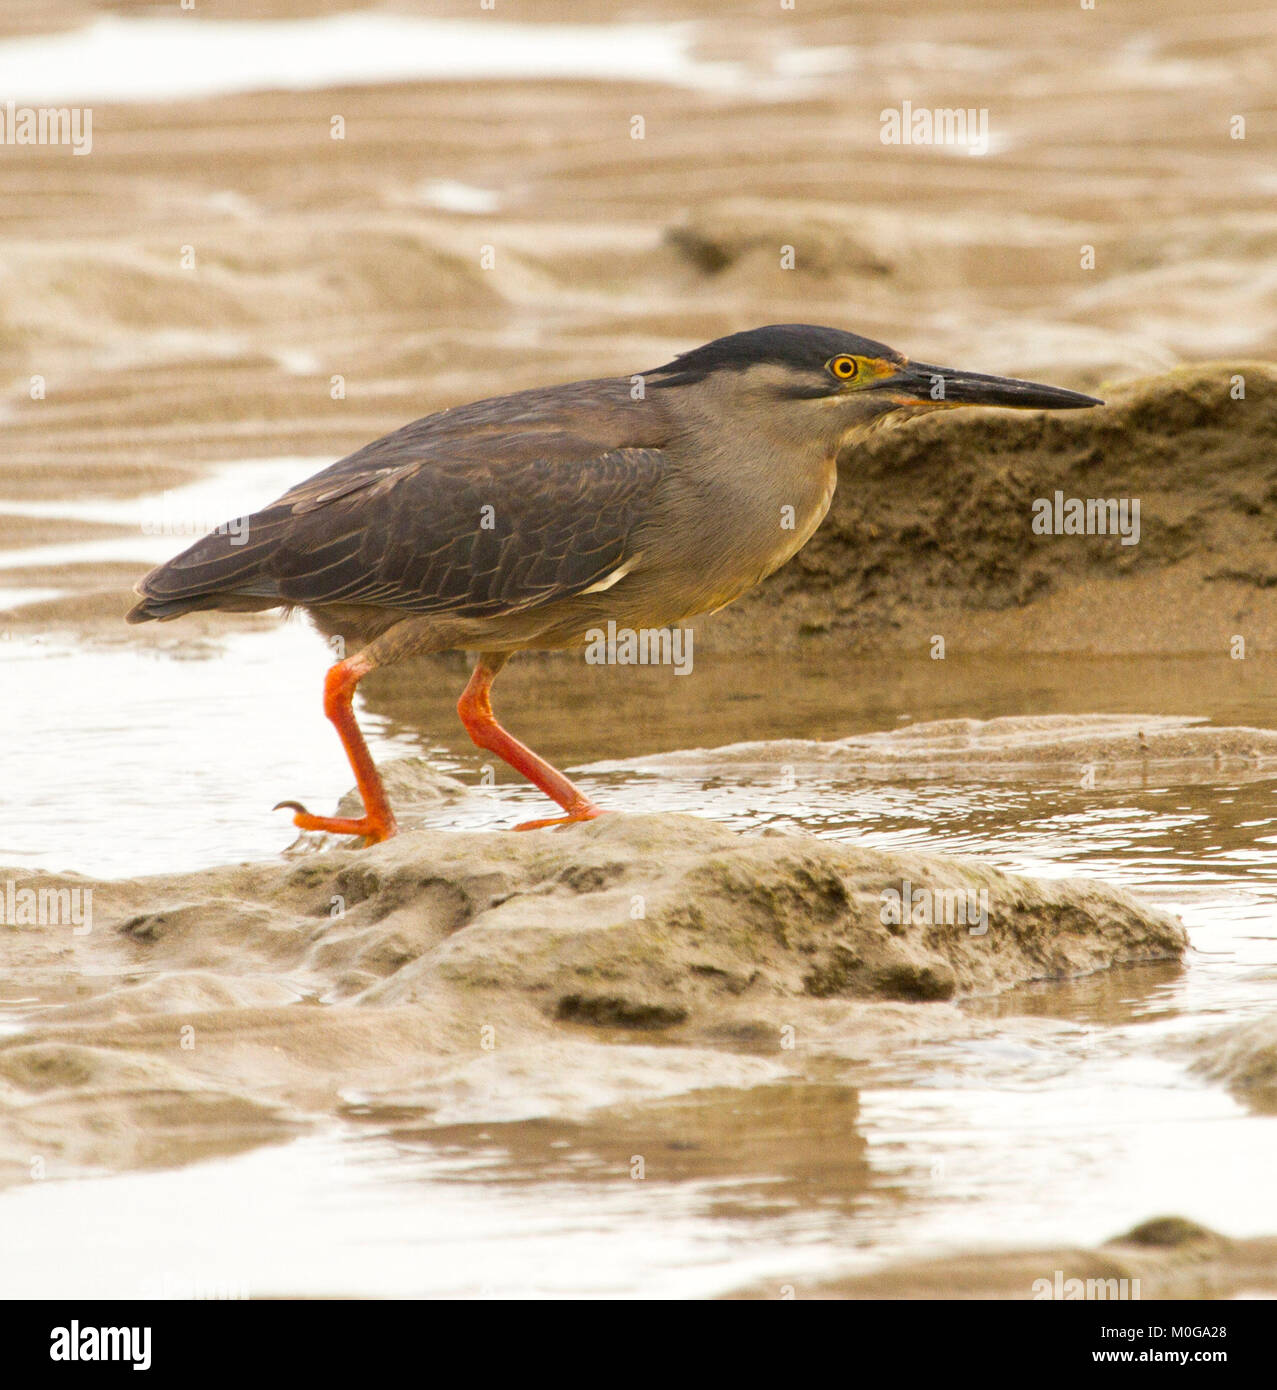 Striated / mangrove heron, Butorides striatus, with long bill and red legs, wading among pools of water on beach in Australia Stock Photo